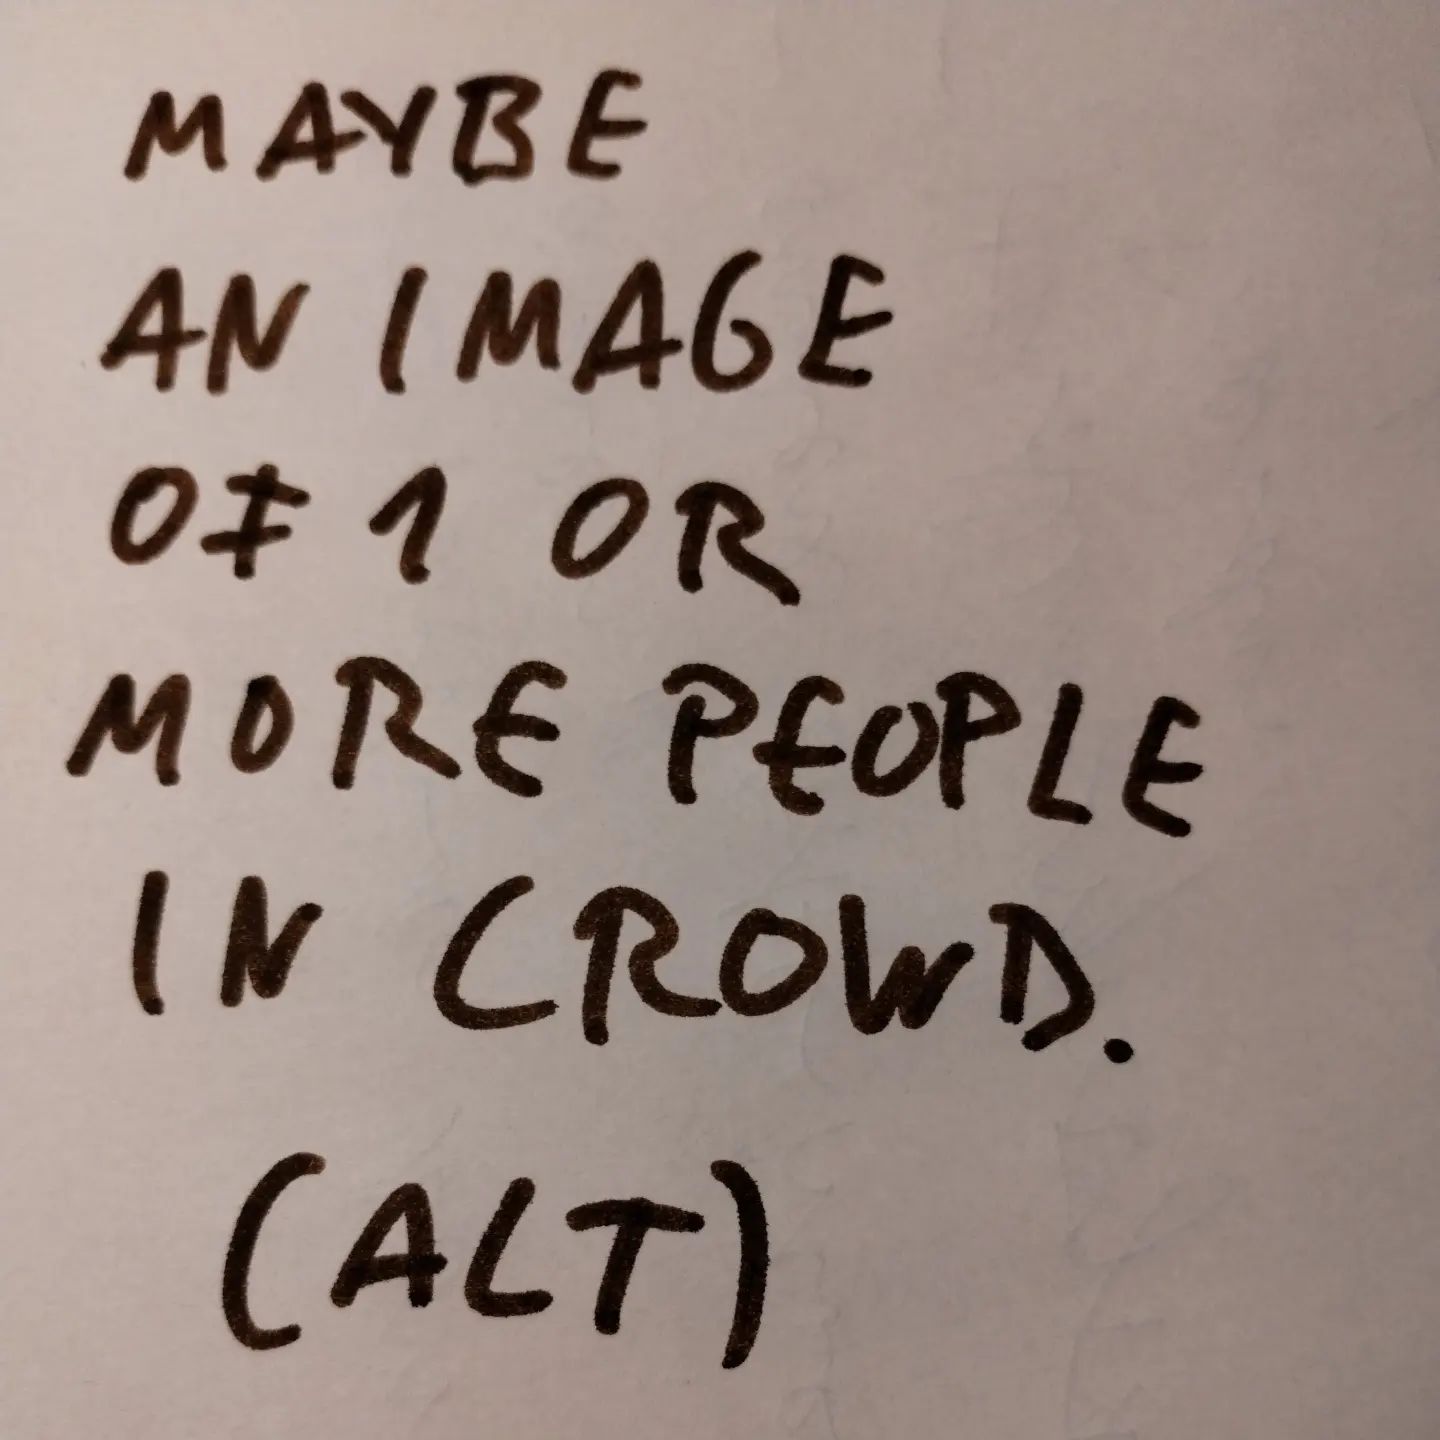 Photo of handwritten text on paper:	Maybe an image of 1 or more people in crowd.	(ALT)